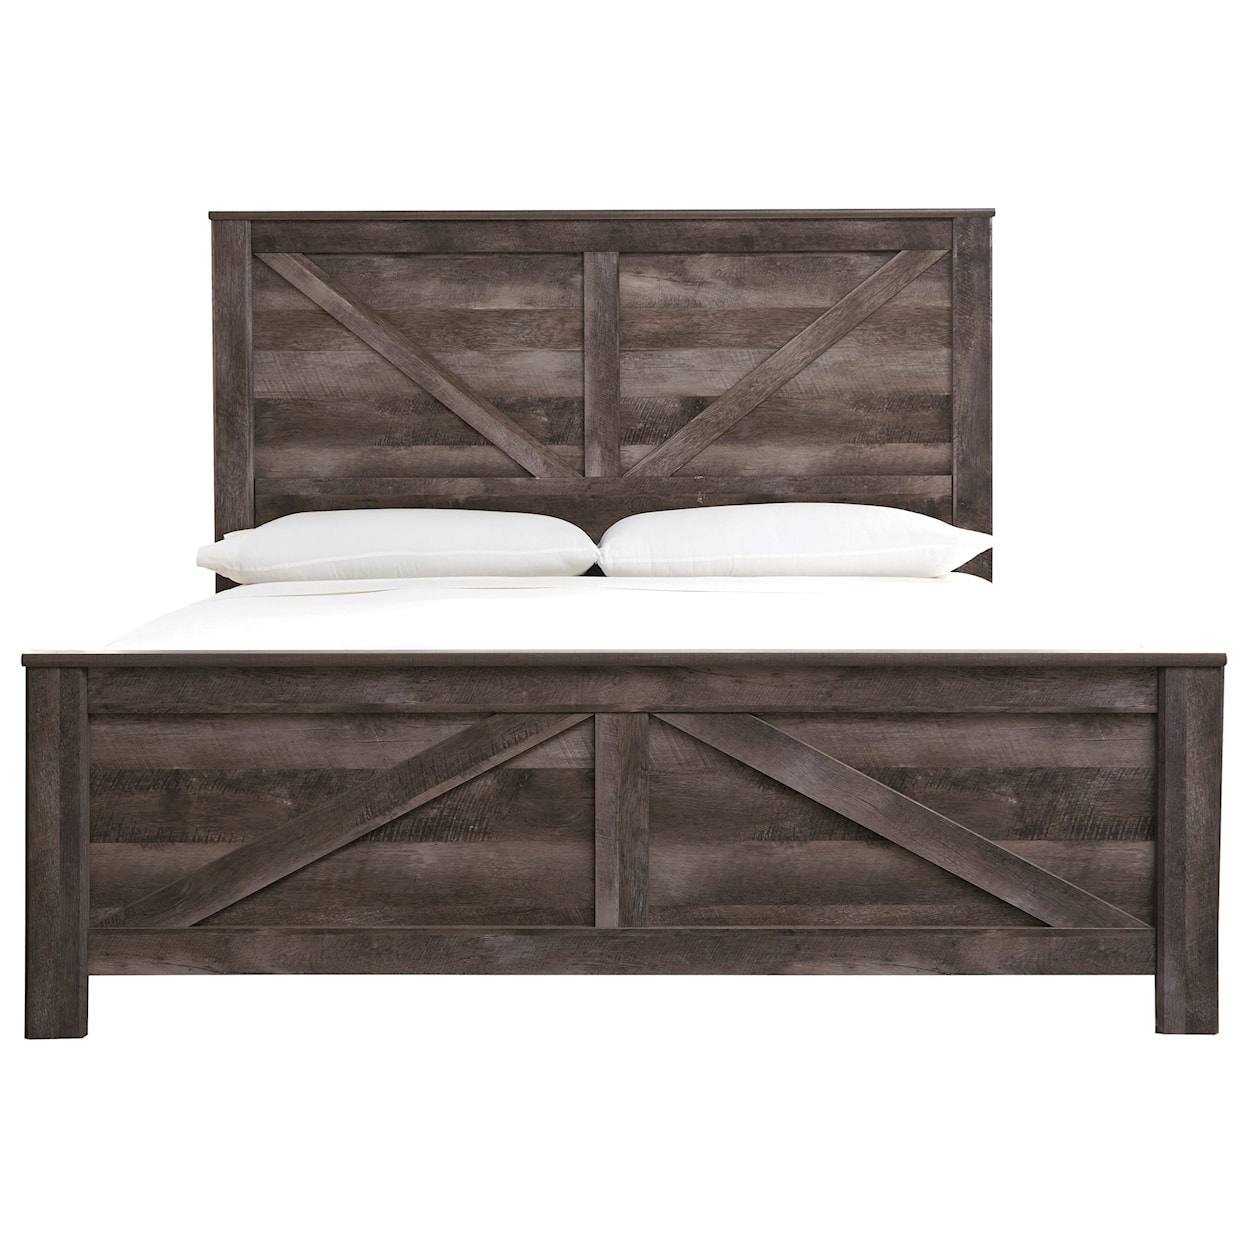 Signature Design by Ashley Wynnlow King Crossbuck Panel Bed